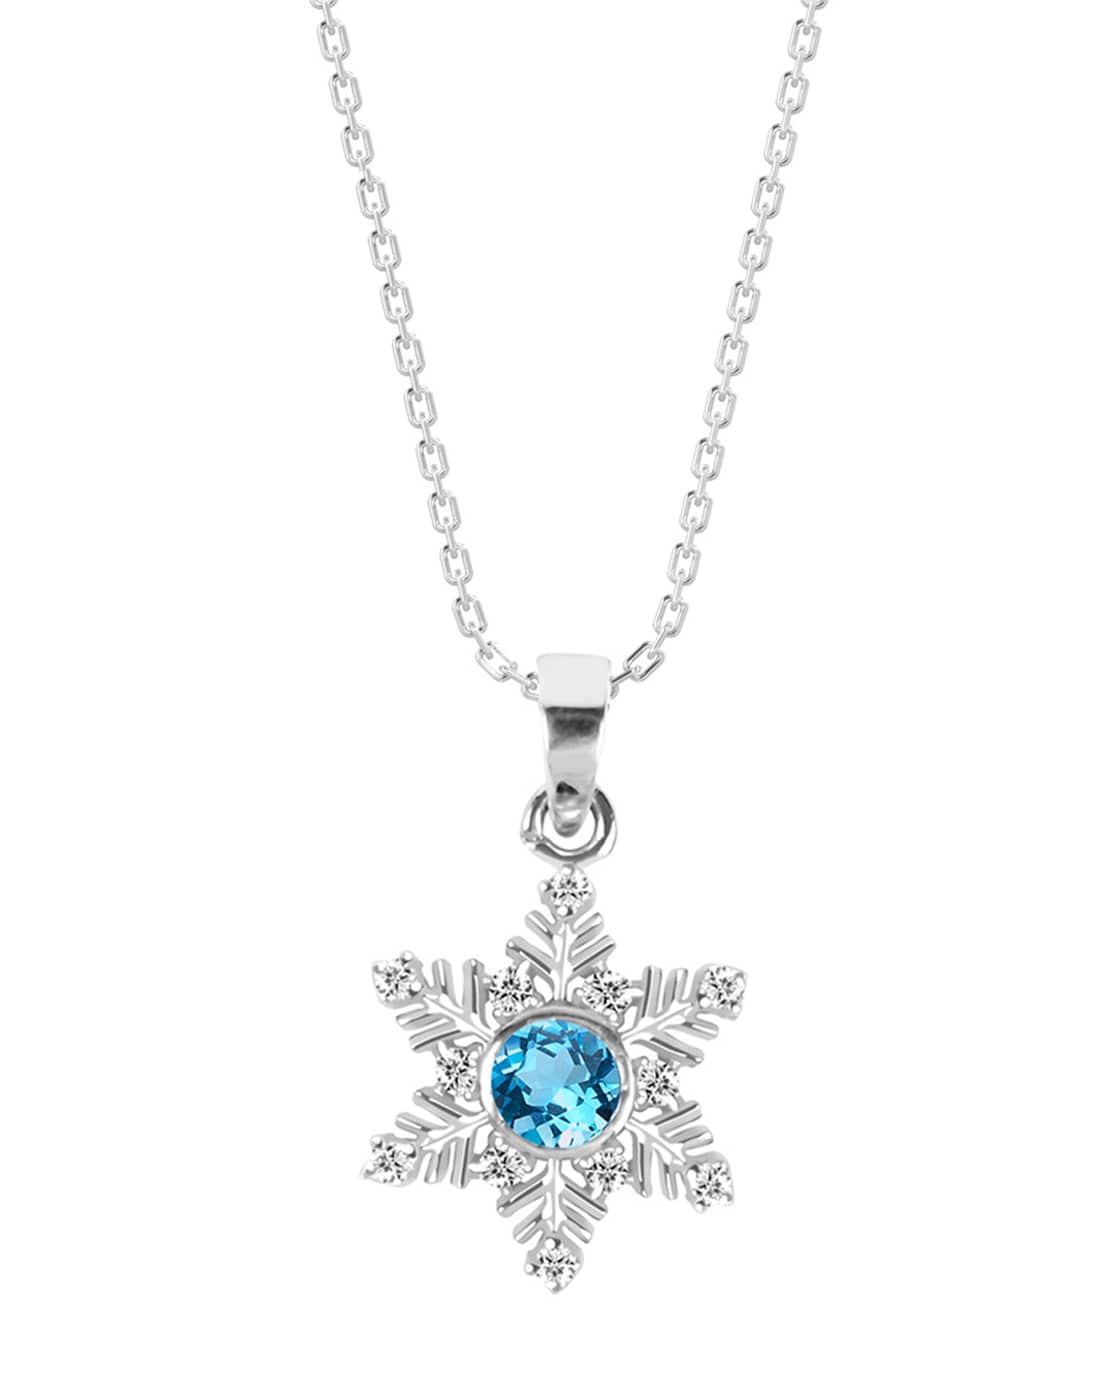 Amazon.com: Bling Jewelry Holiday Party Simulated Frozen Ice Blue Topaz  Christmas Snowflake Pendant Necklace For Women Teen .925 Sterling Silver:  Sterling Silver Snowflake Necklace: Clothing, Shoes & Jewelry